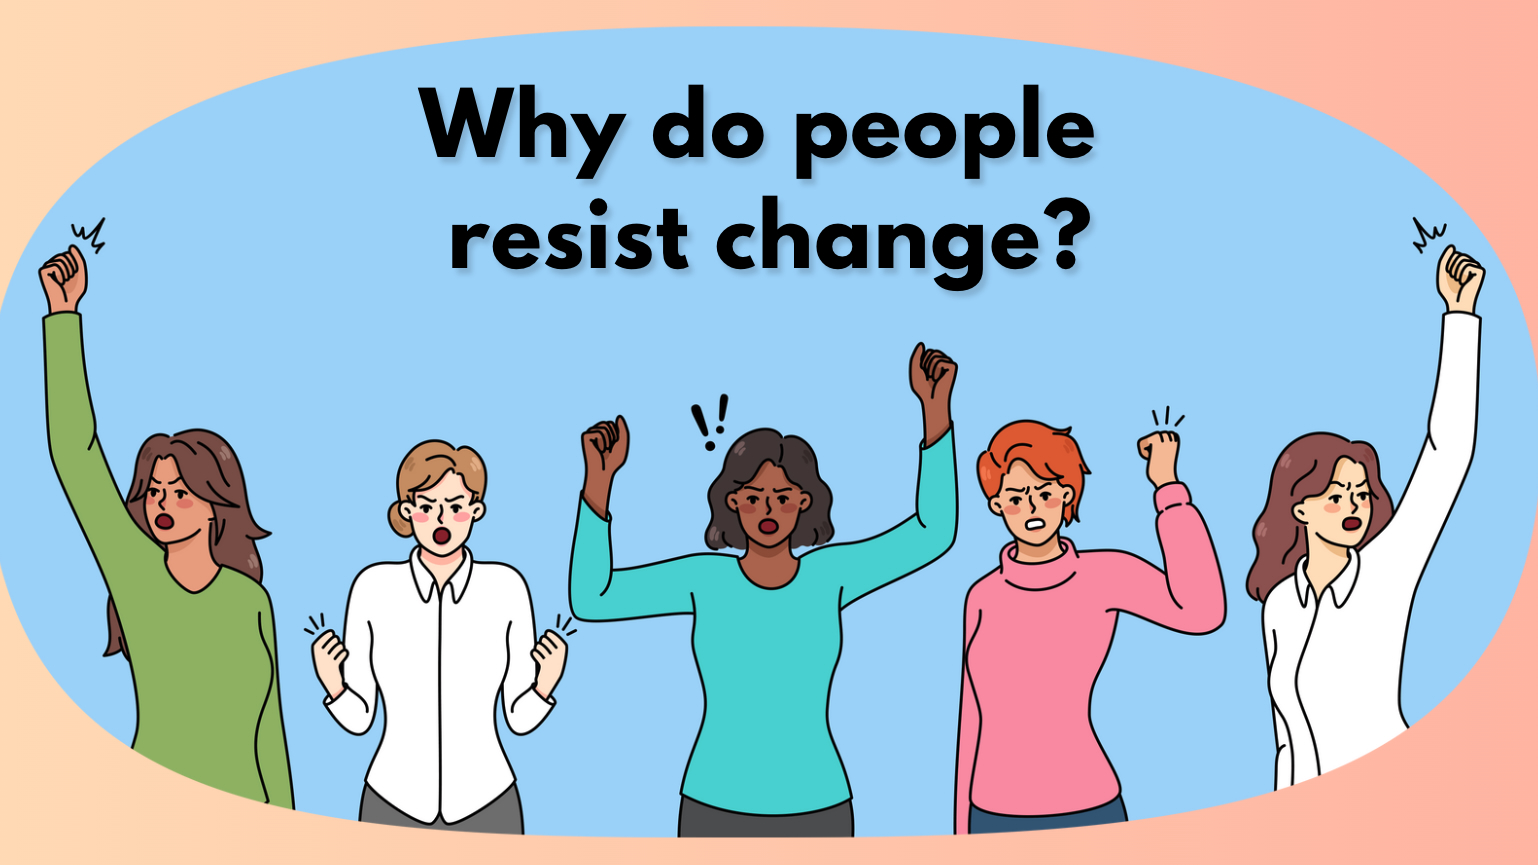 employees resist change because